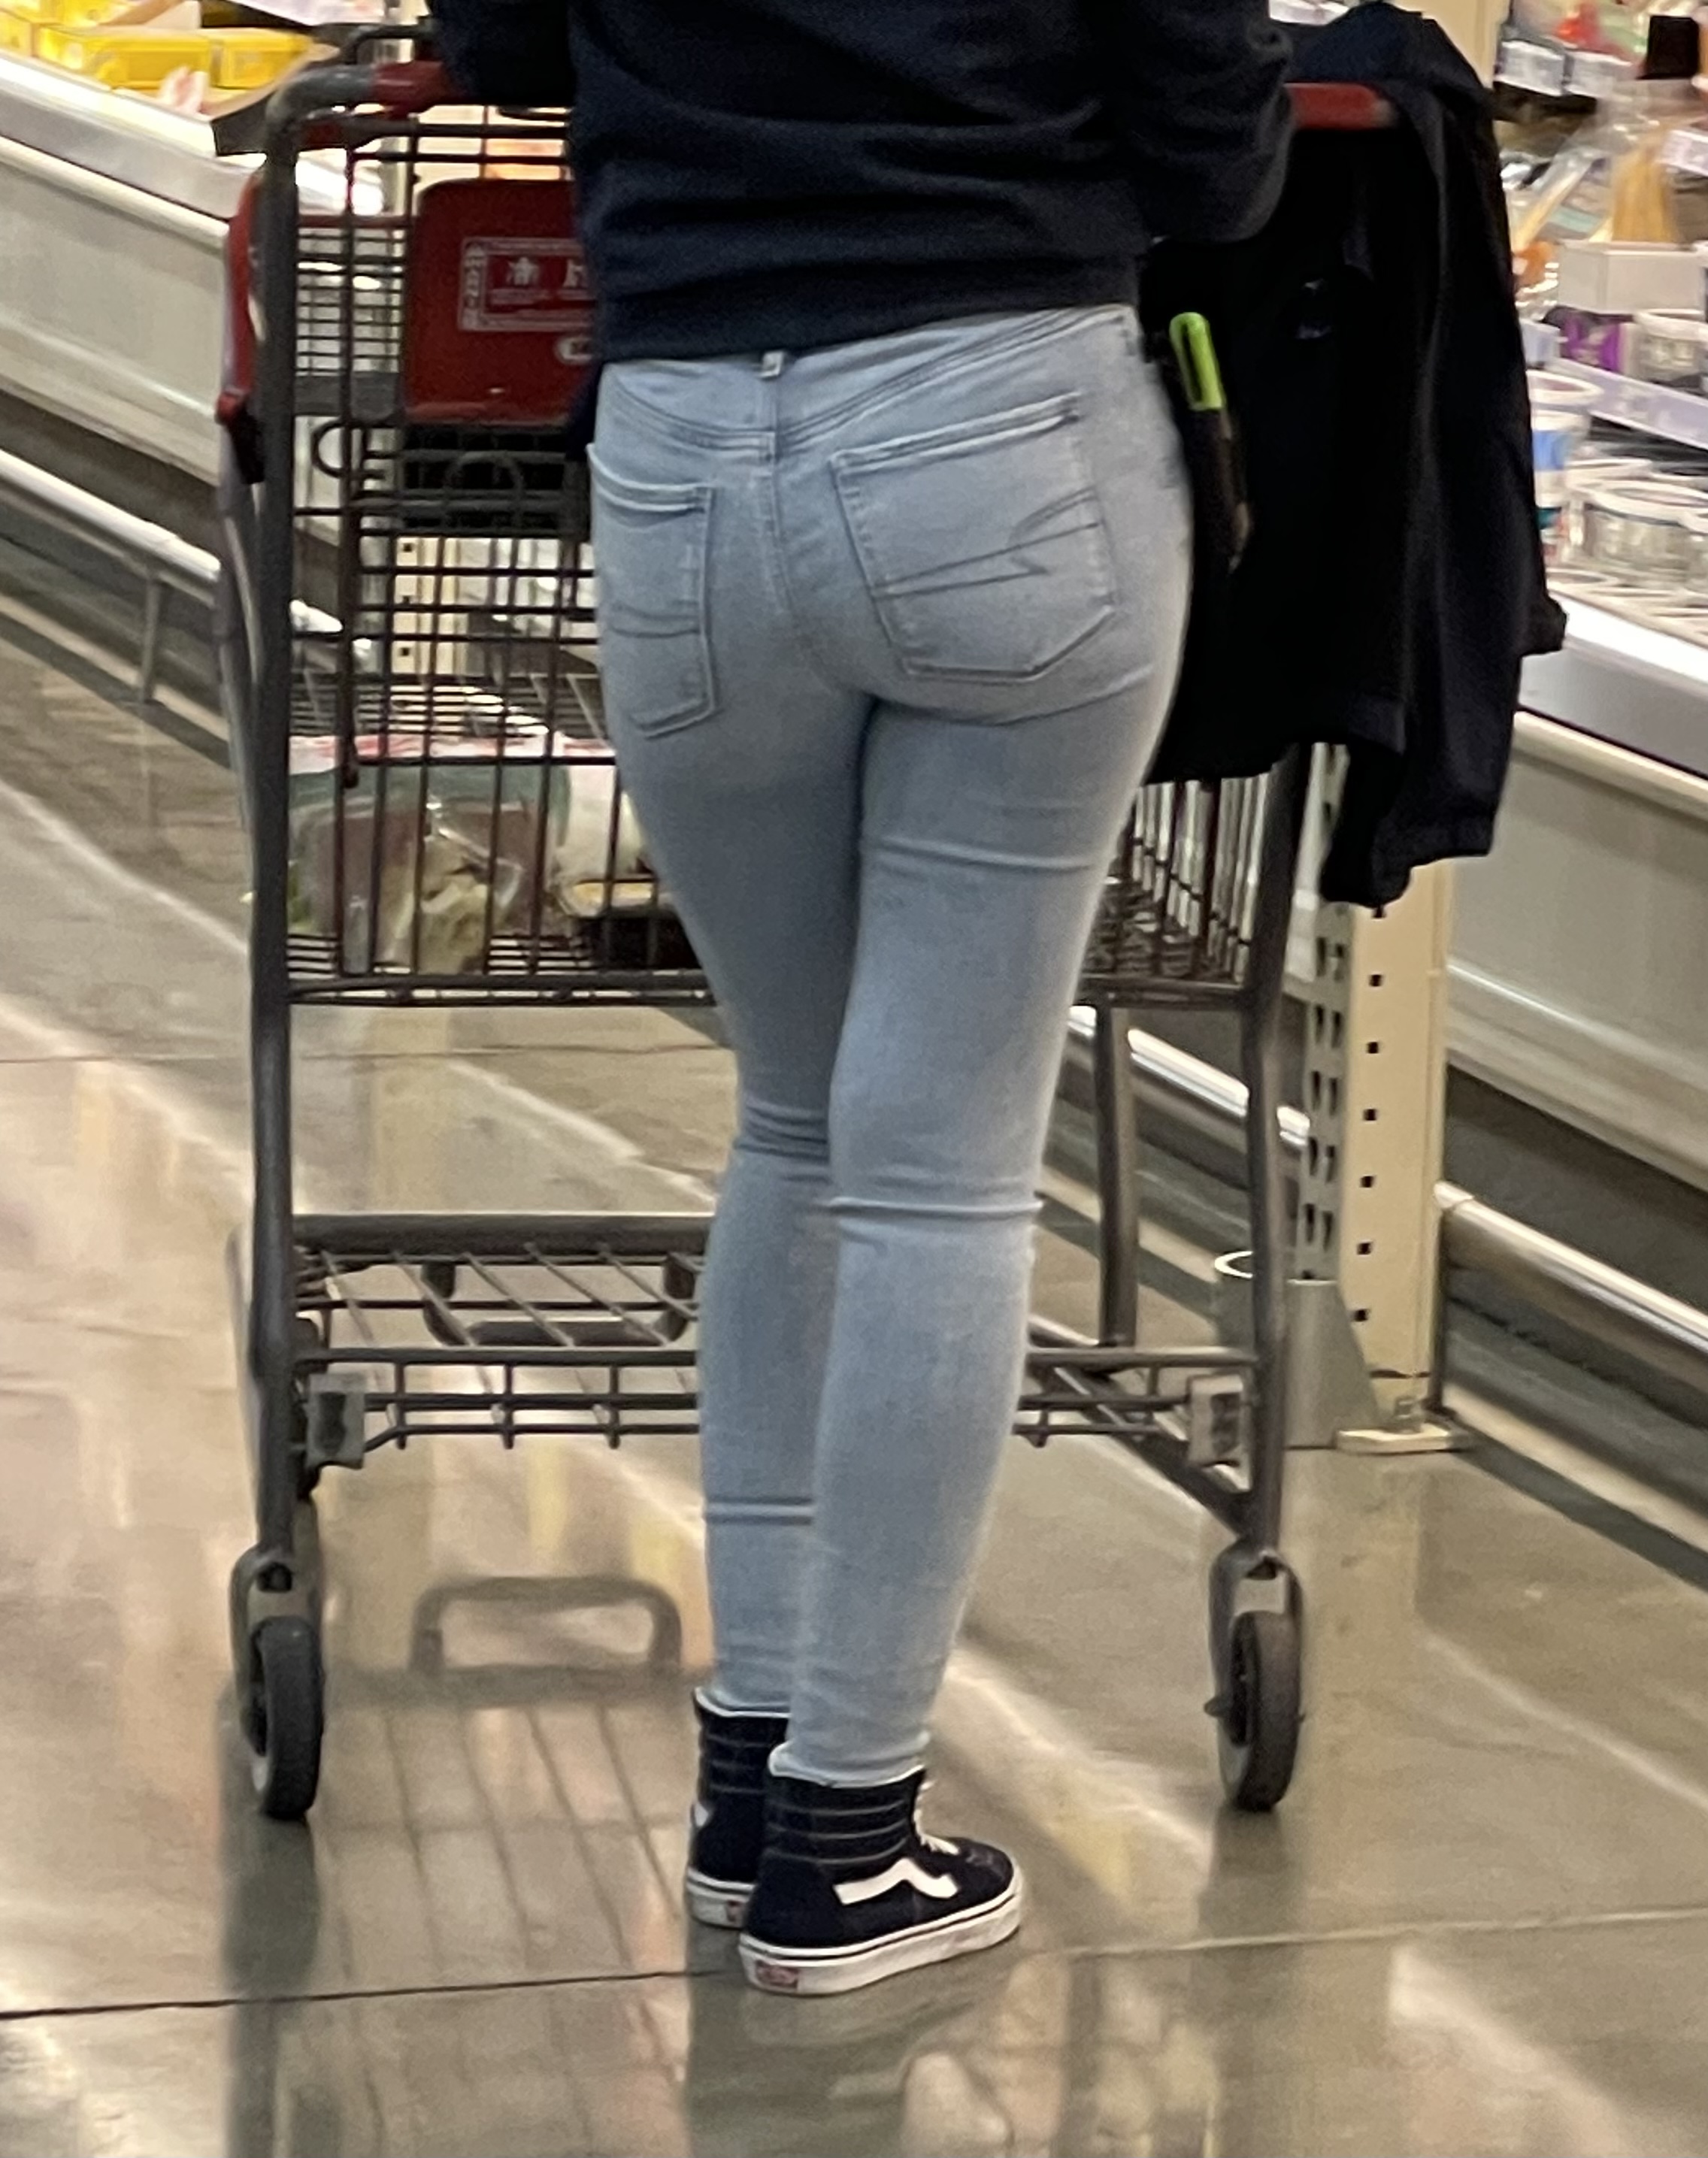 New haul of perfect ass coworker - Tight Jeans - Forum